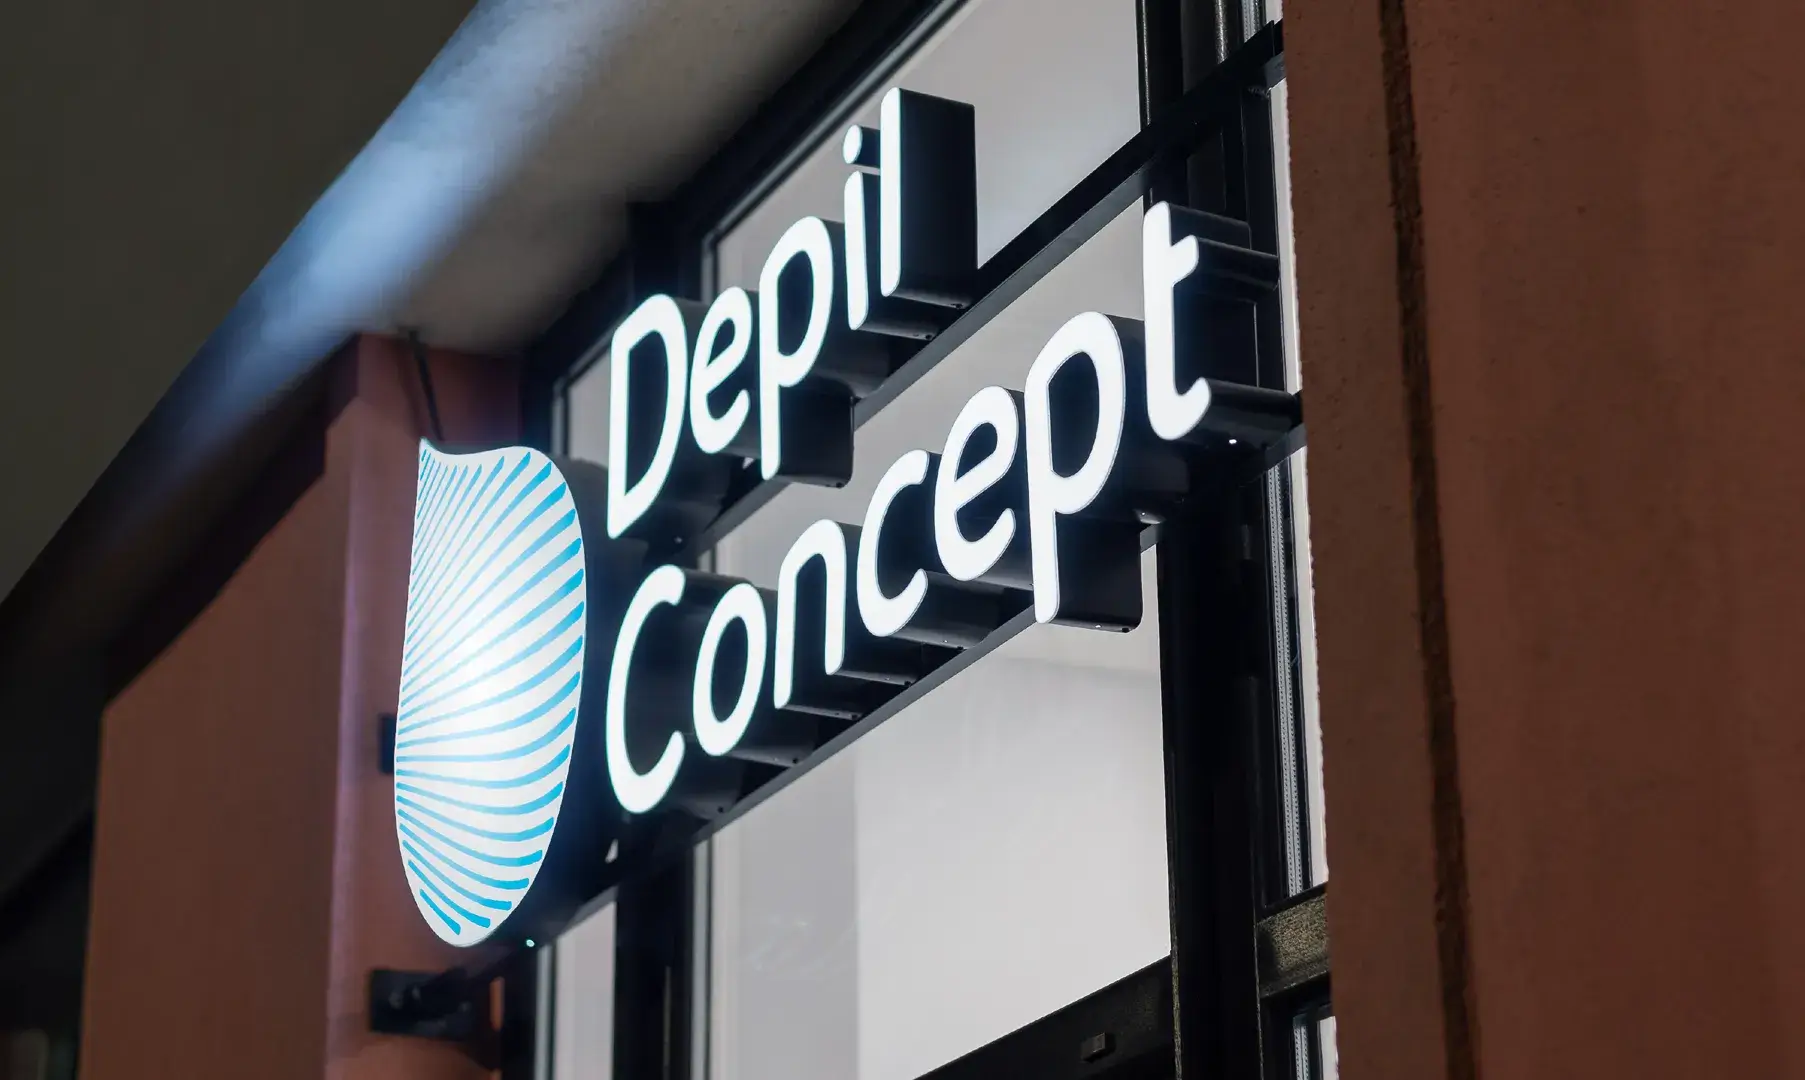 Depil Concept's illuminated LED outdoor letters